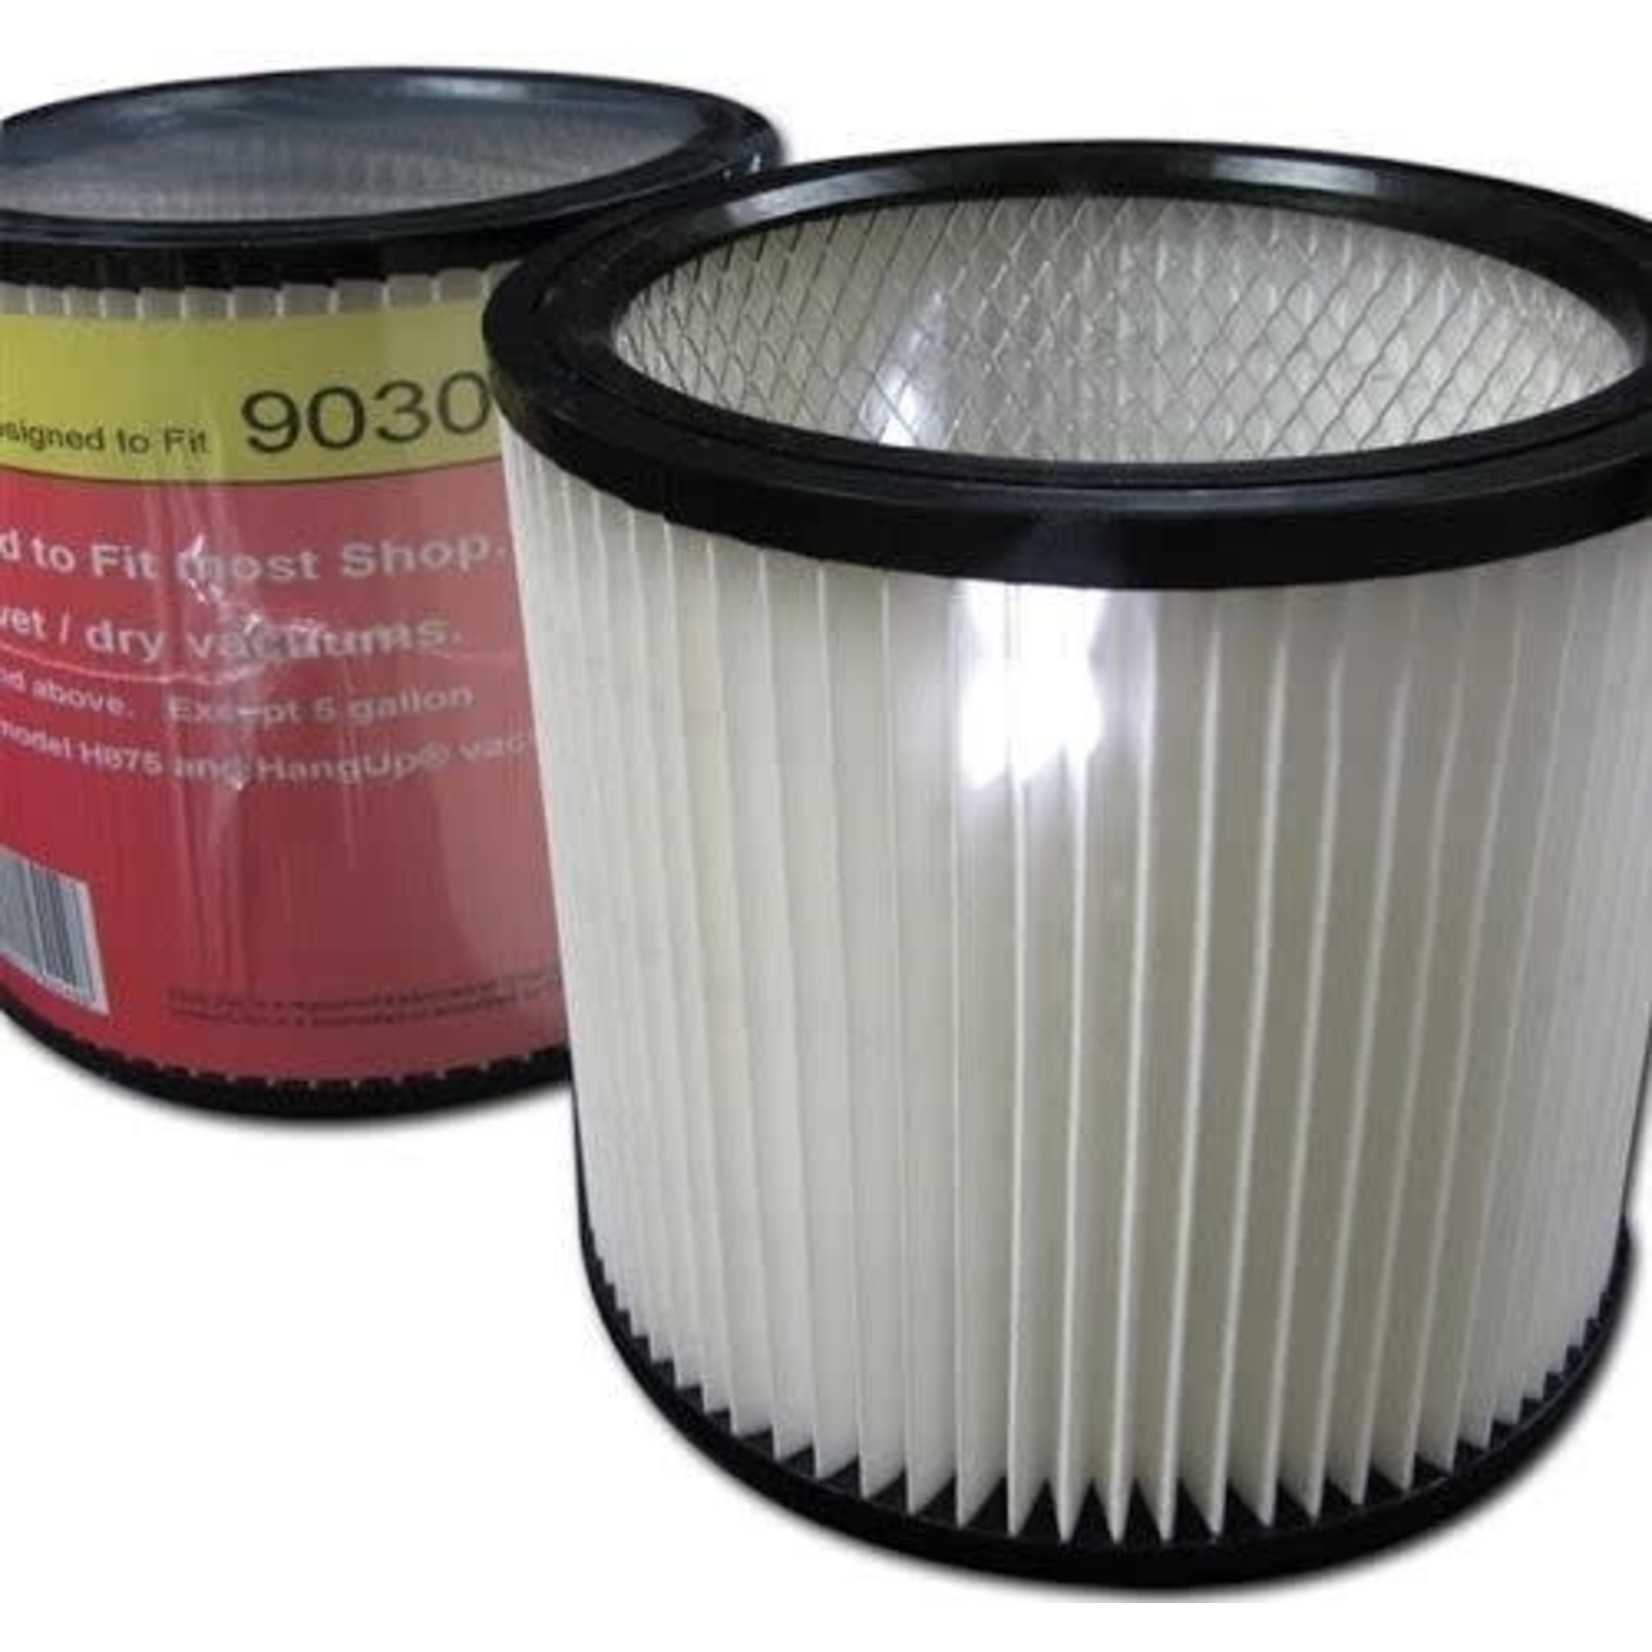 Shop Vac Shop Vac Pleated Wet/Dry Filter 6" X 7-1/2" - Open Ends